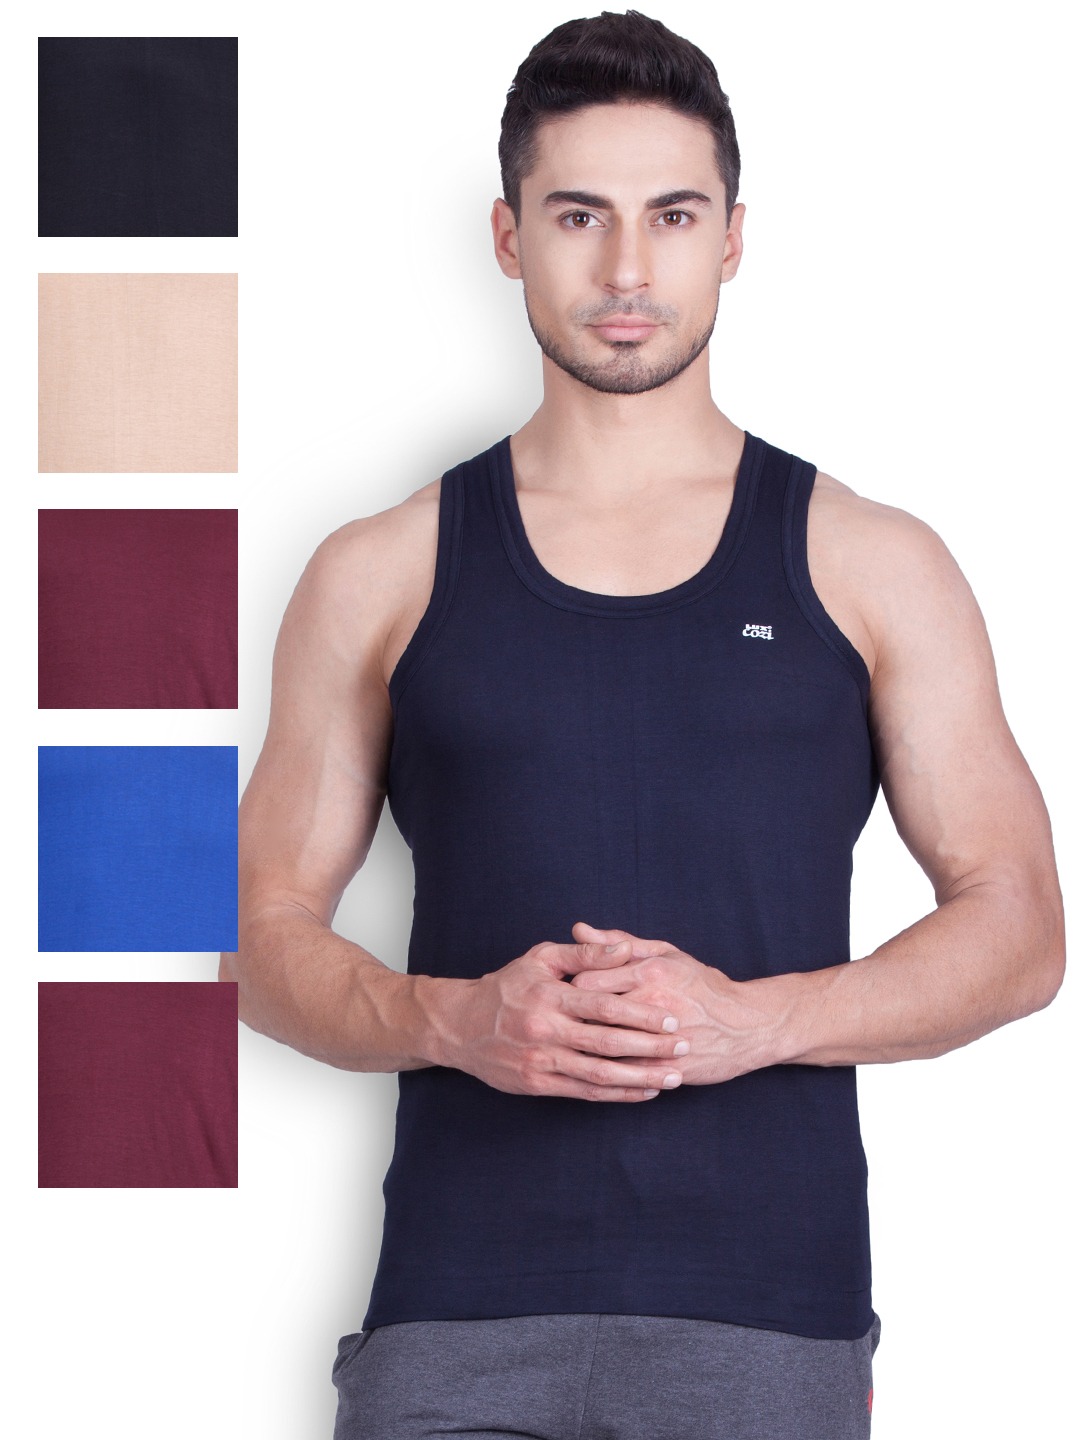 Clothing Innerwear Vests | Lux Cozi Pack of 6 Innerwear Vests COZI_COL_RN_90 - HQ51952